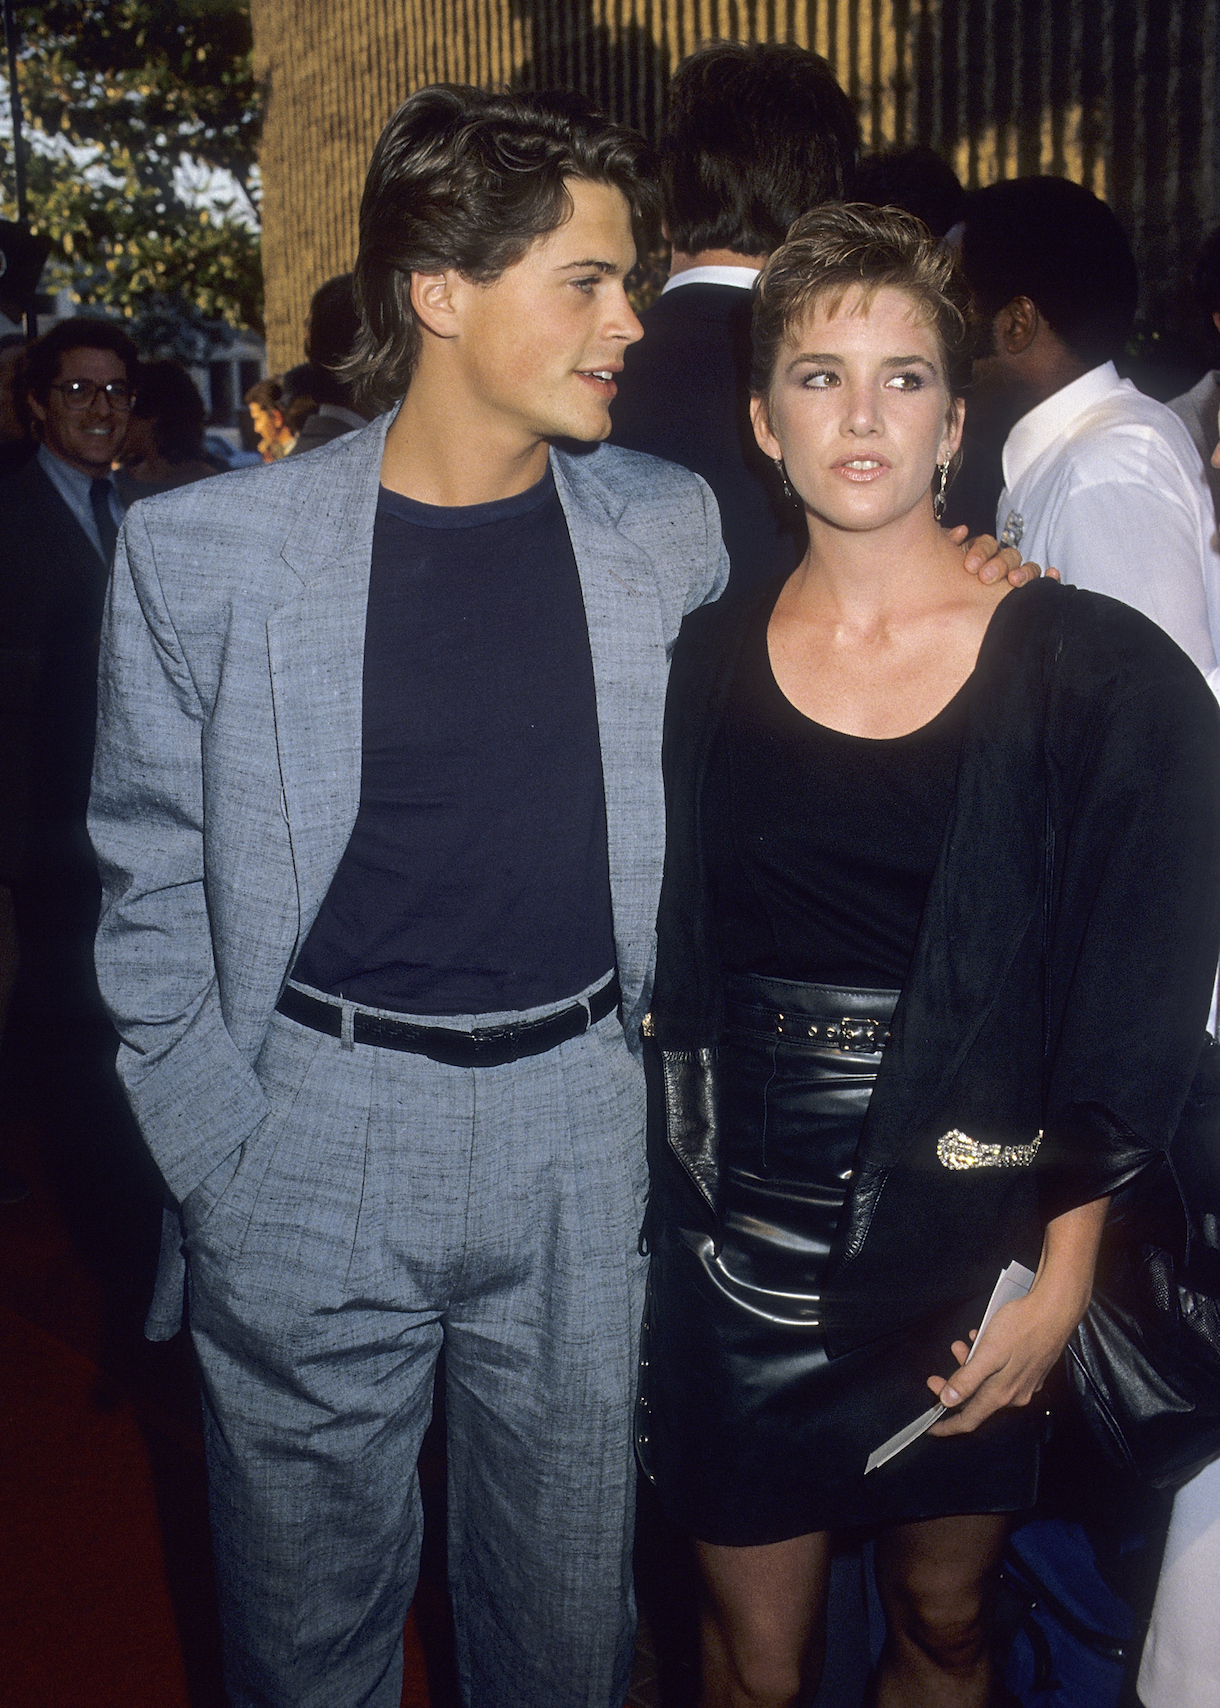 Rob Lowe and Melissa Gilbert attend the 'Ghostbusters' Premiere in 1984